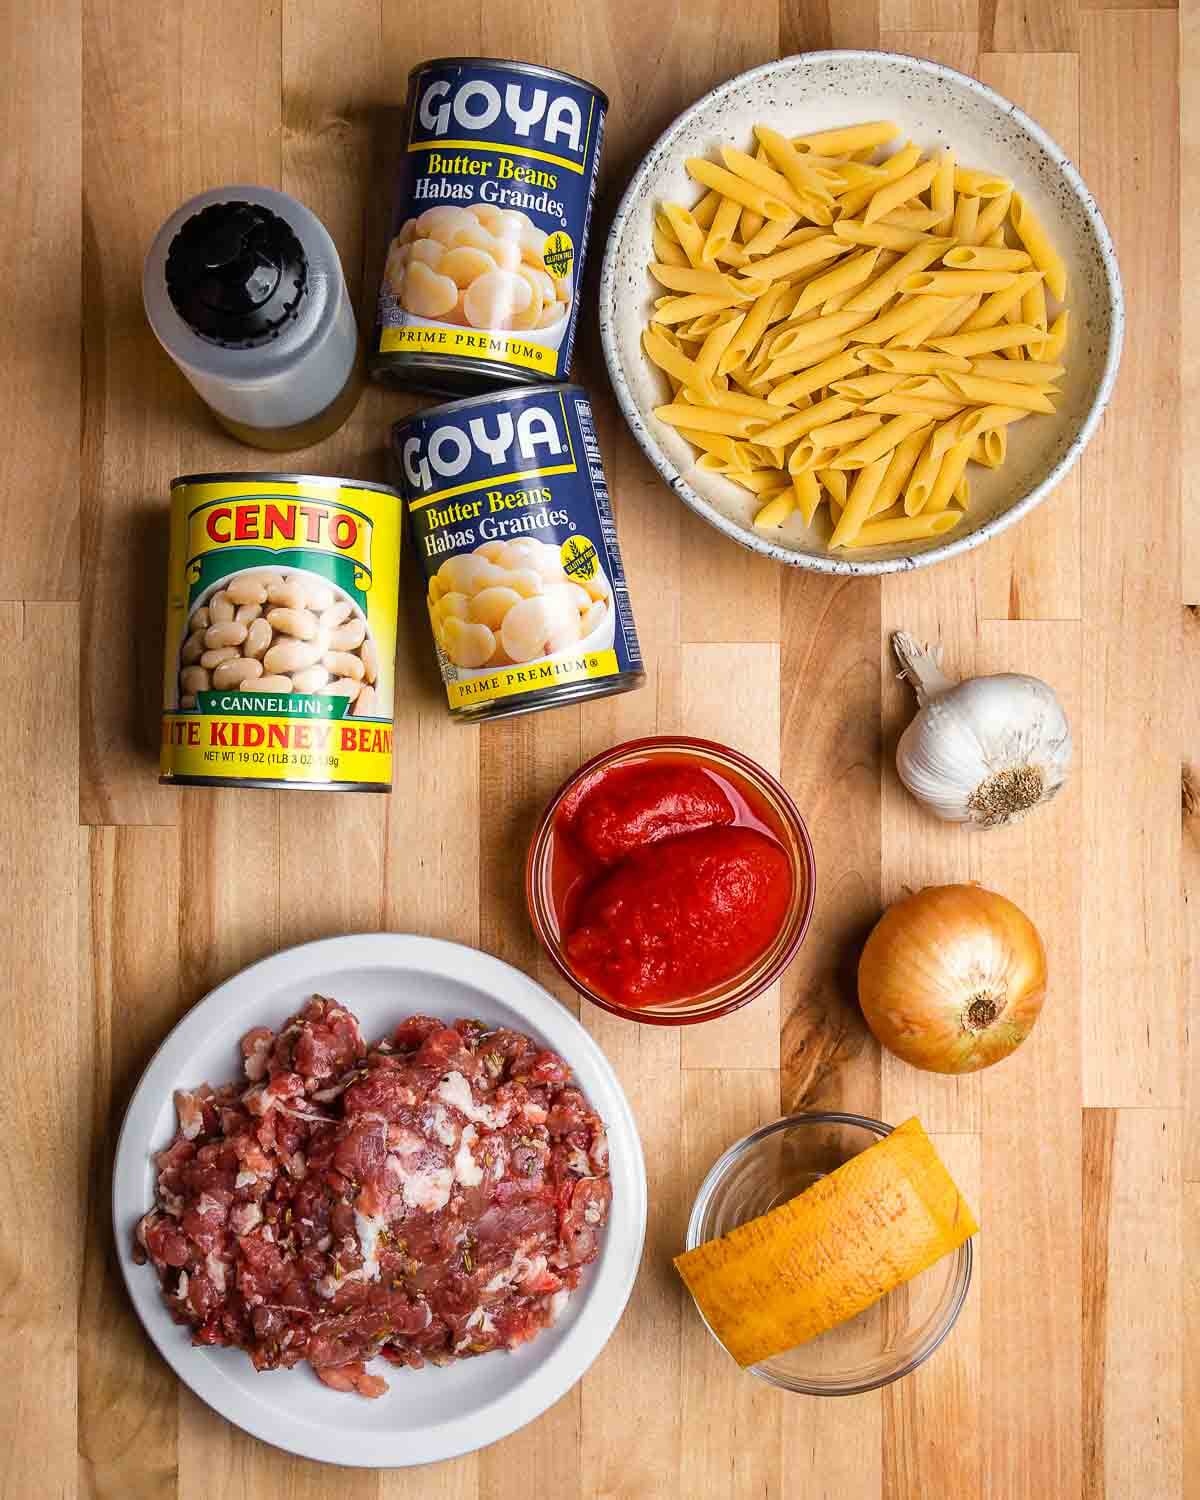 Ingredients shown: olive oil, beans, penne, tomatoes, bulk Italian sausage, Parmigiano rind, onion, and garlic.